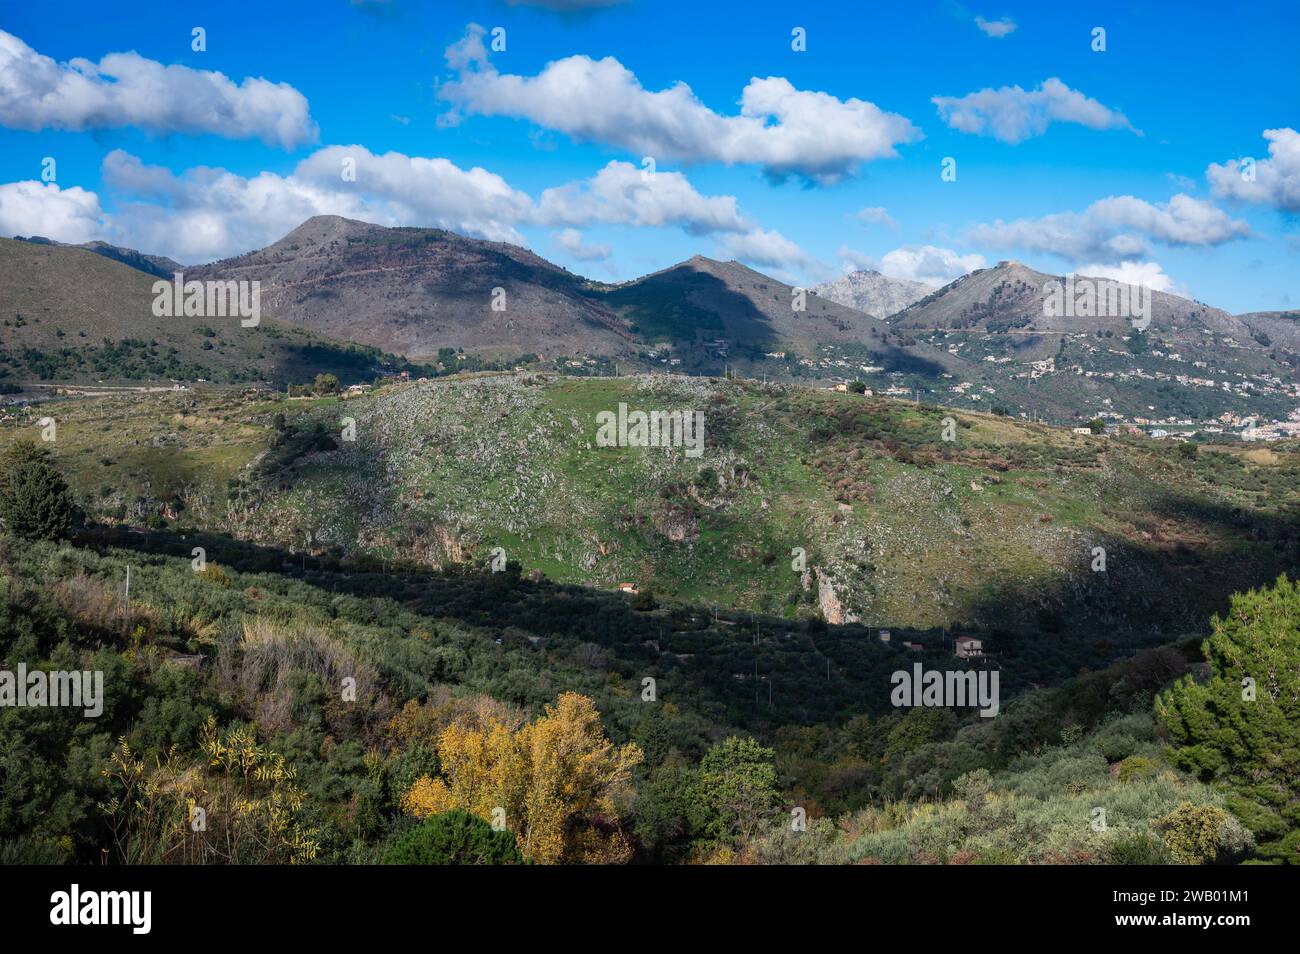 Panoramic view over the rough mountains with houses and blue sky around Cannizzaro - Favare, Sicily, Italy Stock Photo